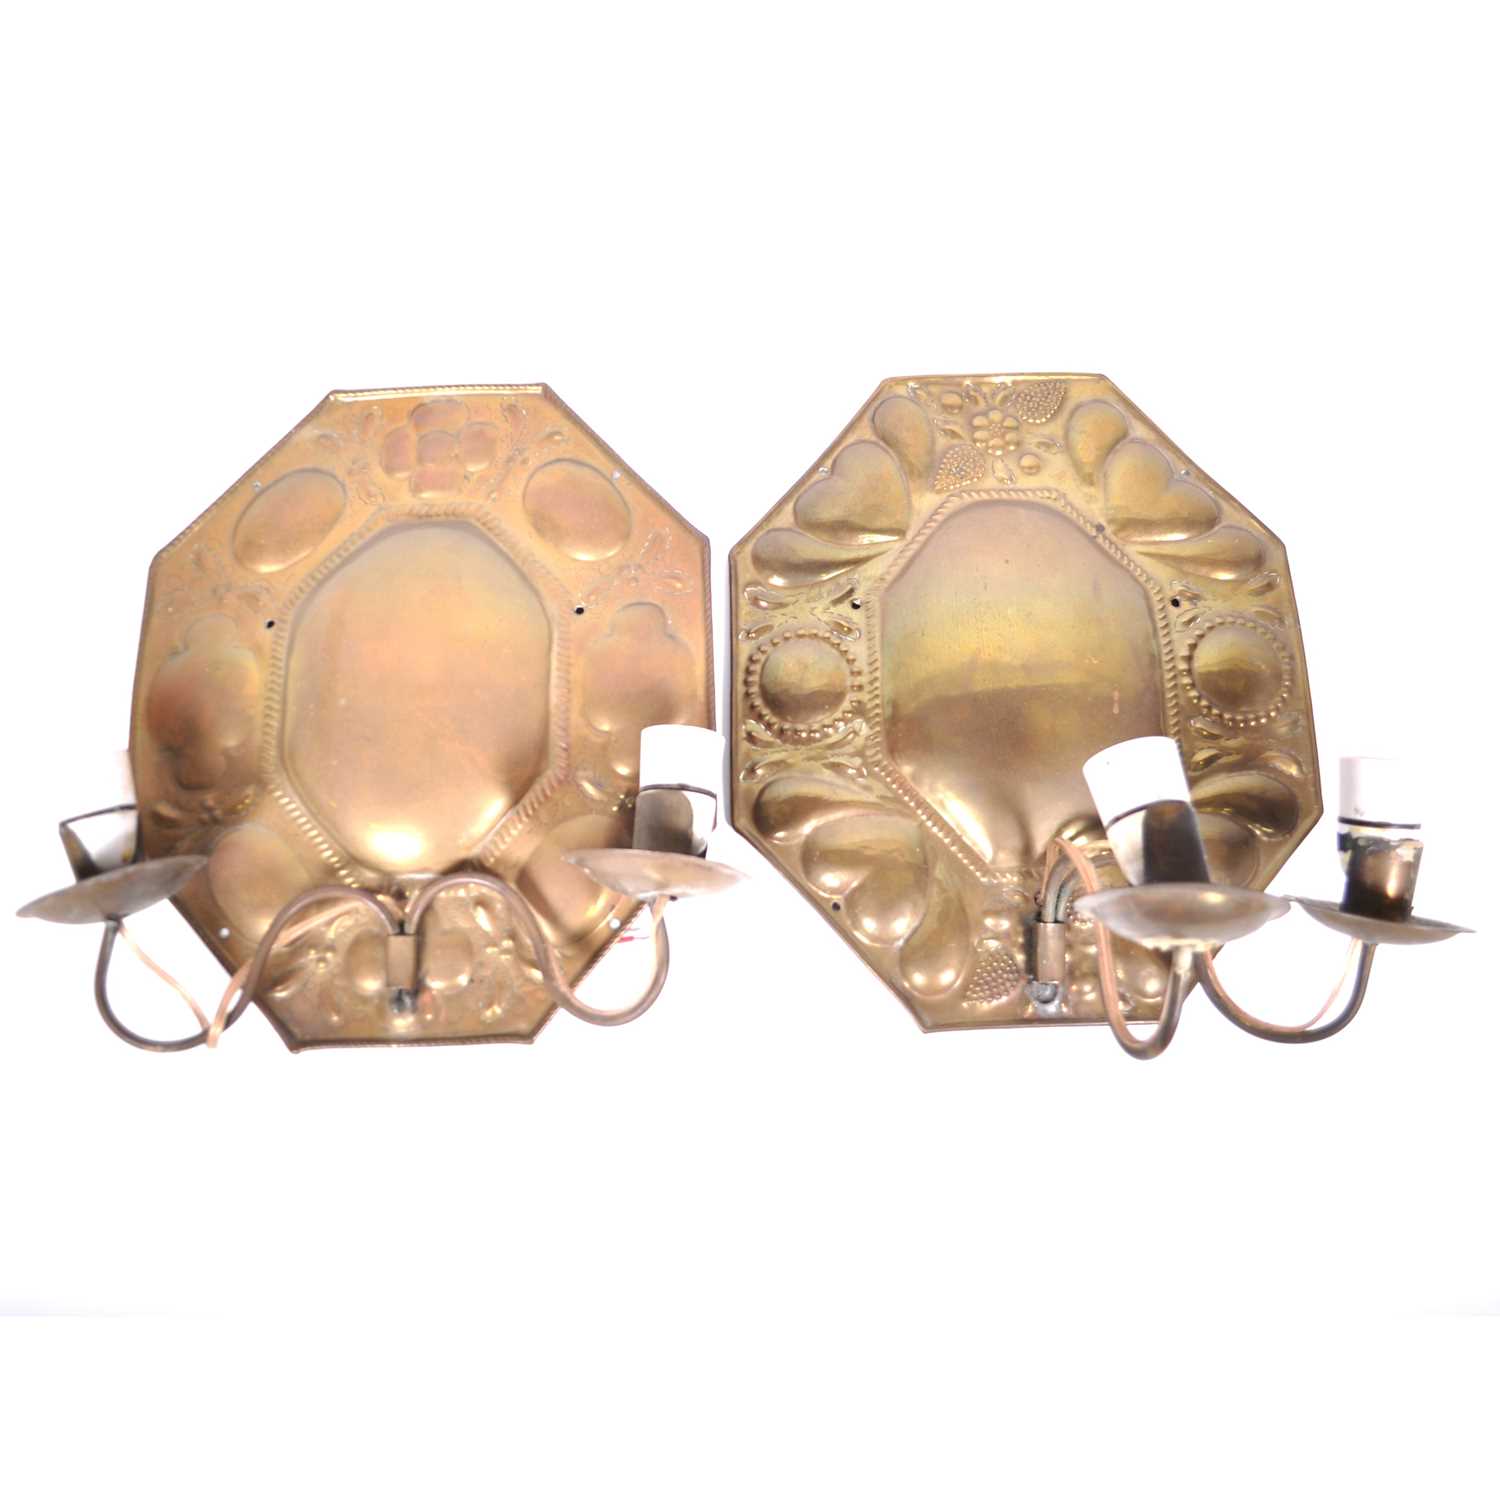 Lot 518 - Two similar Arts and Crafts brass wall sconces